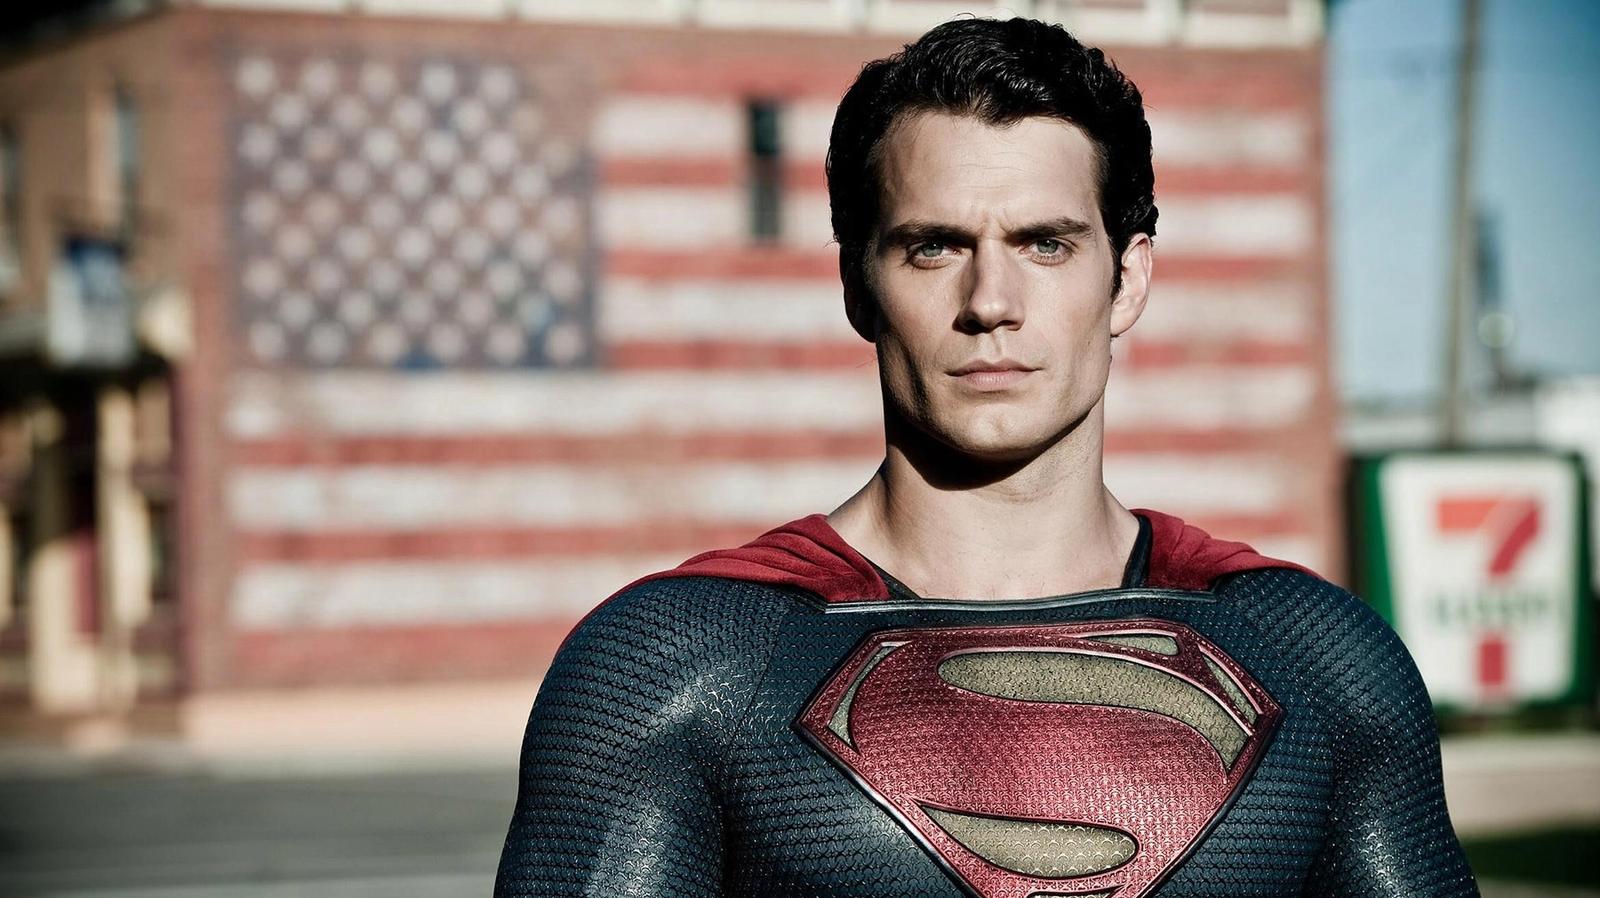 Henry cavill as superman in DC's man of steel